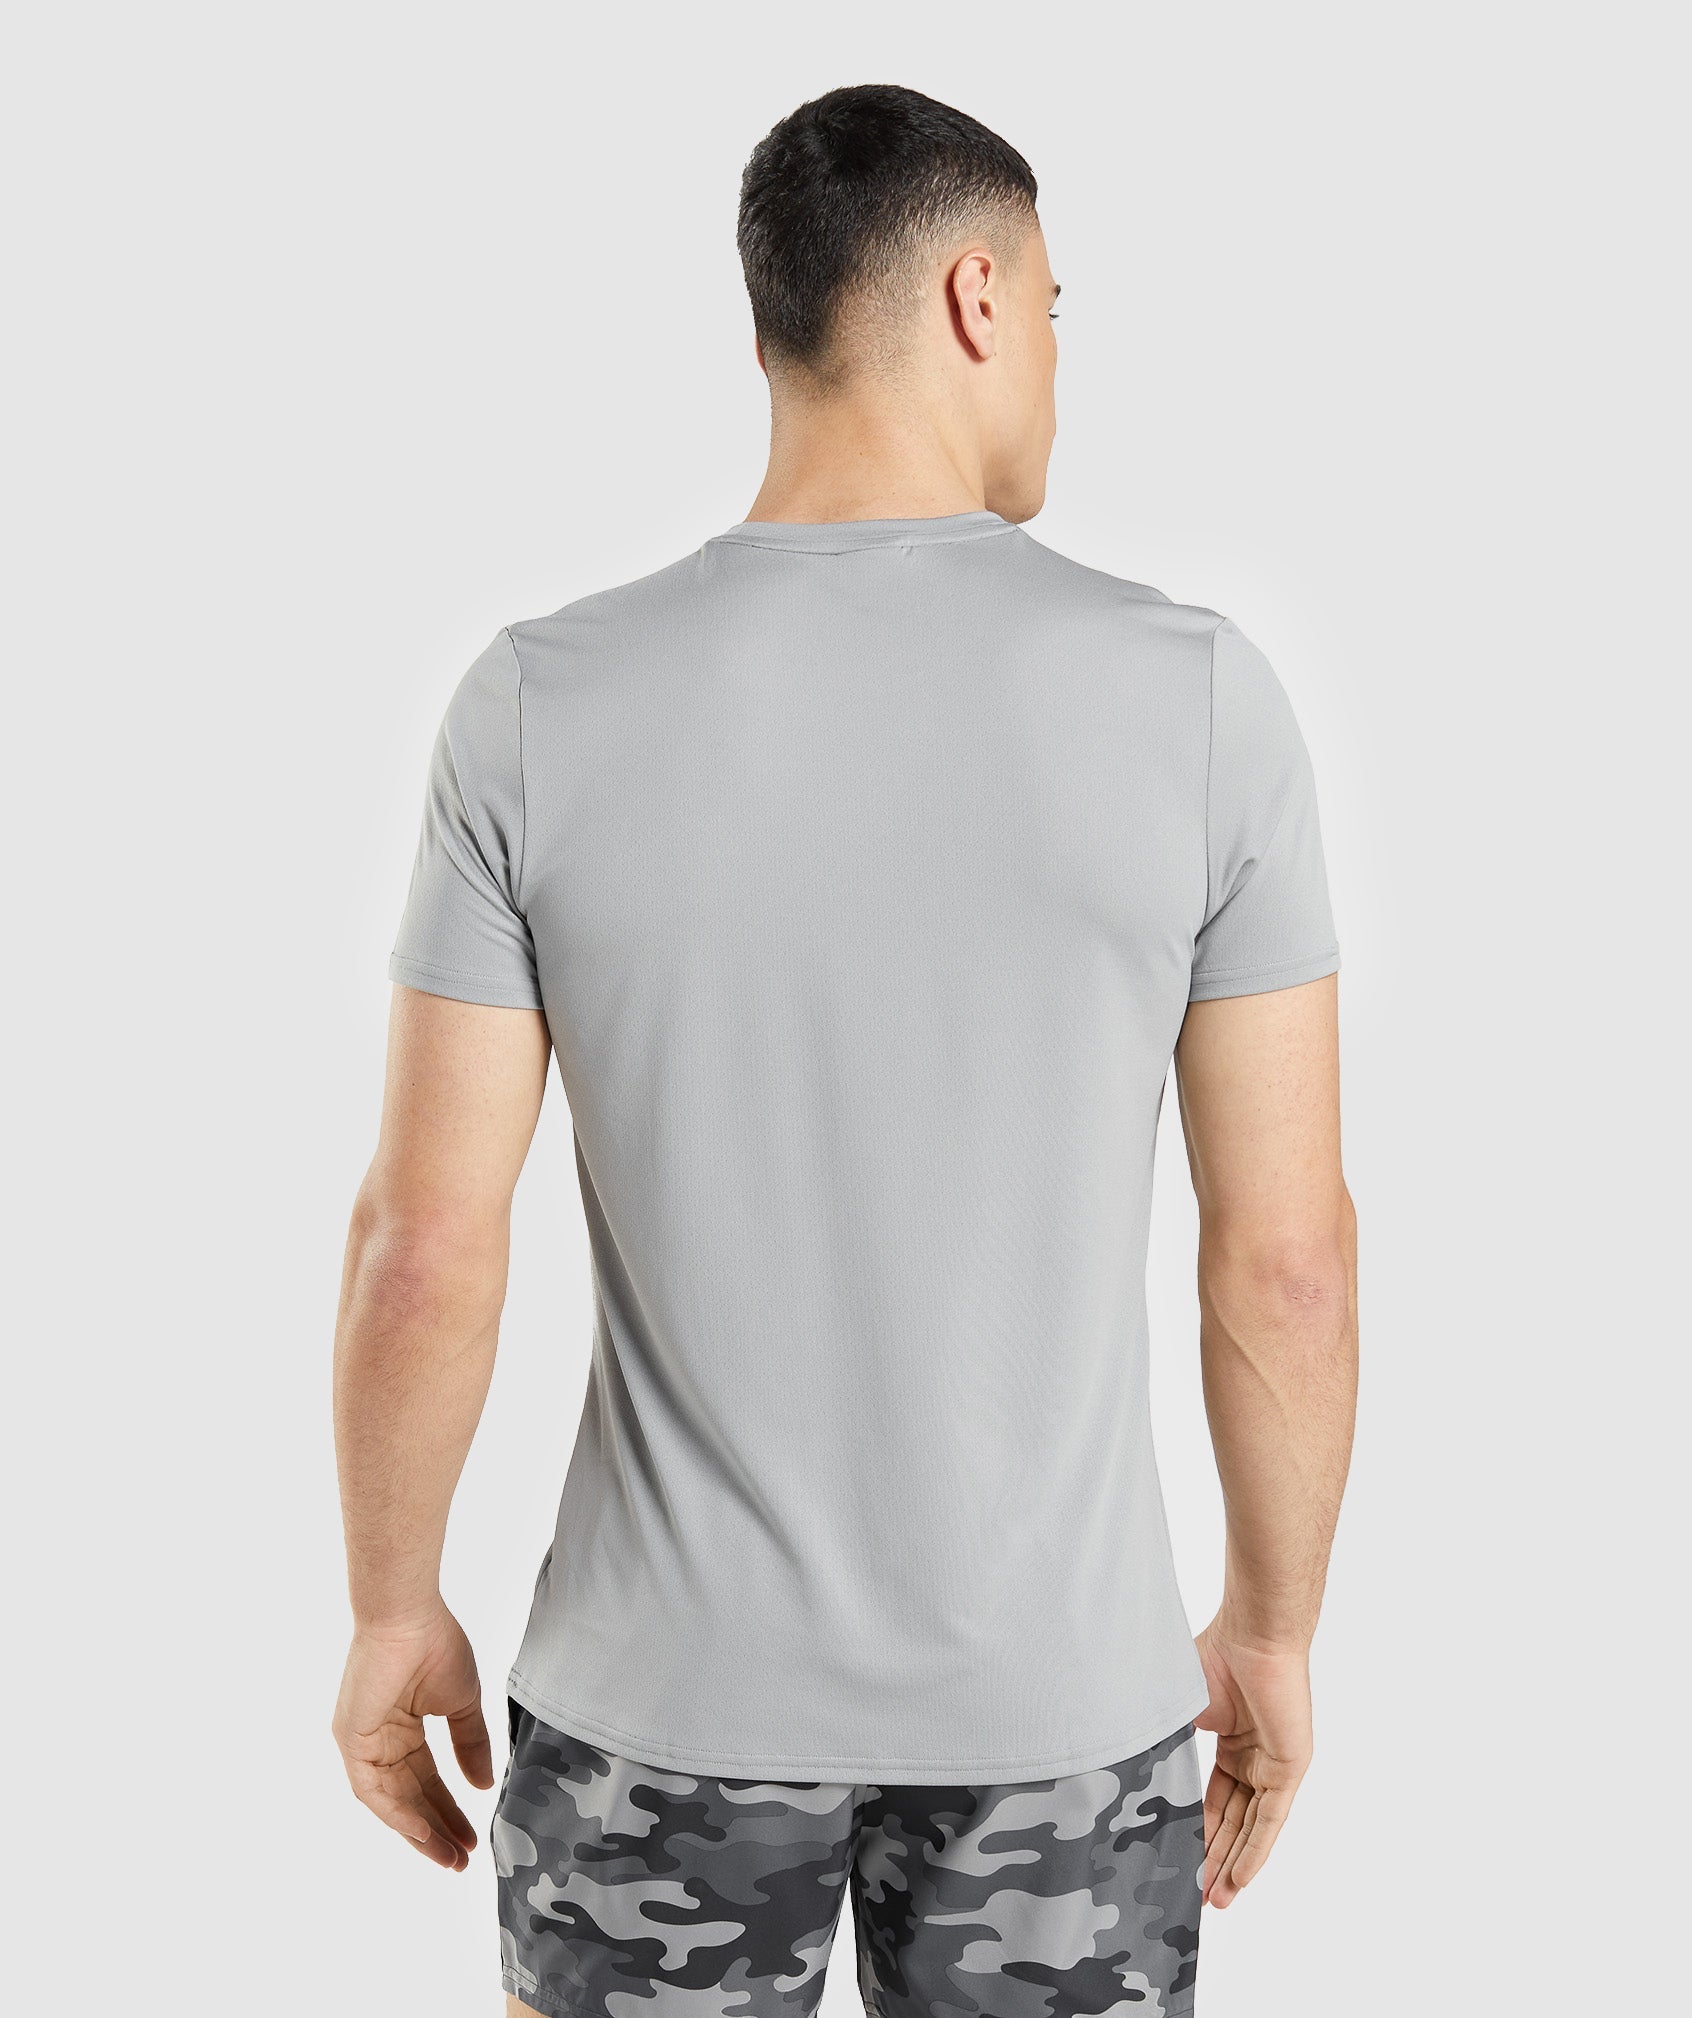 Arrival Graphic T-Shirt in Smokey Grey - view 2